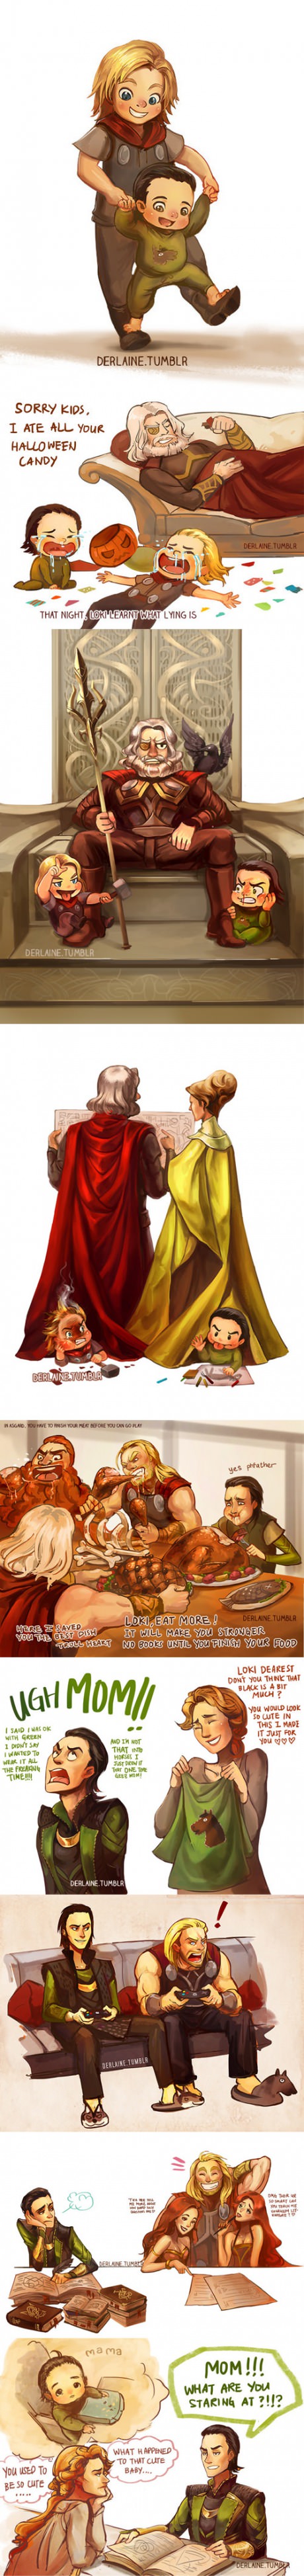 funny-picture-loki-thor-childhood